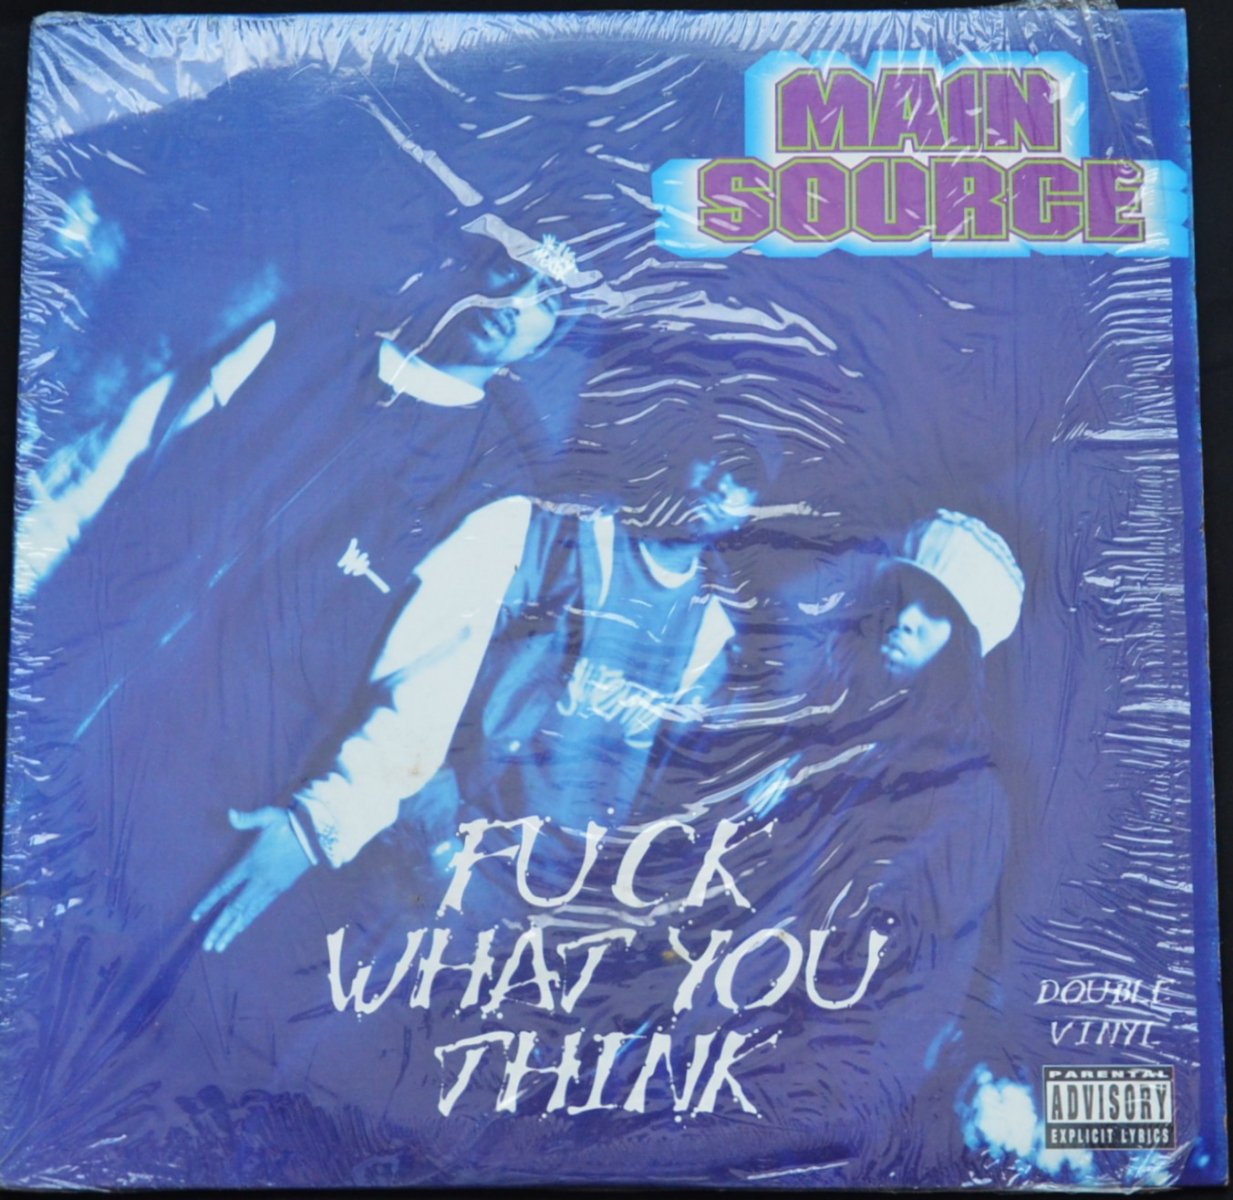 MAIN SOURCE ‎/ FUCK WHAT YOU THINK (2LP)